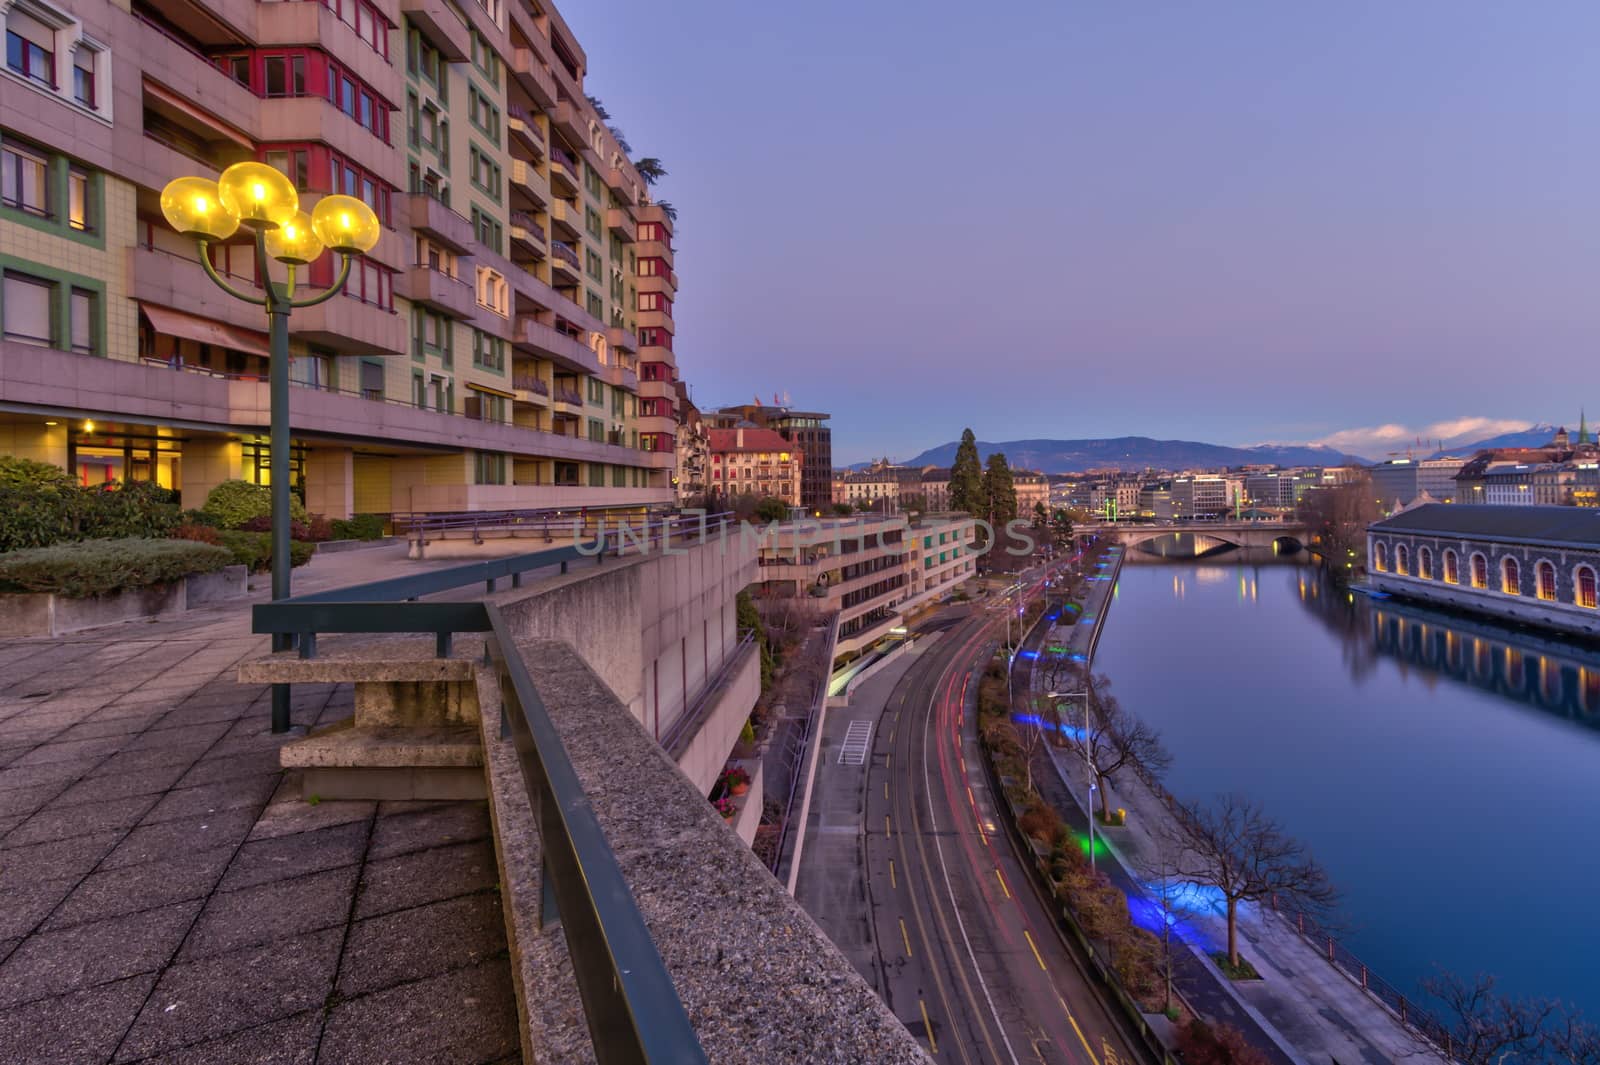 Rhone river and old buildings by sunset, Geneva, Switzerland - HDR